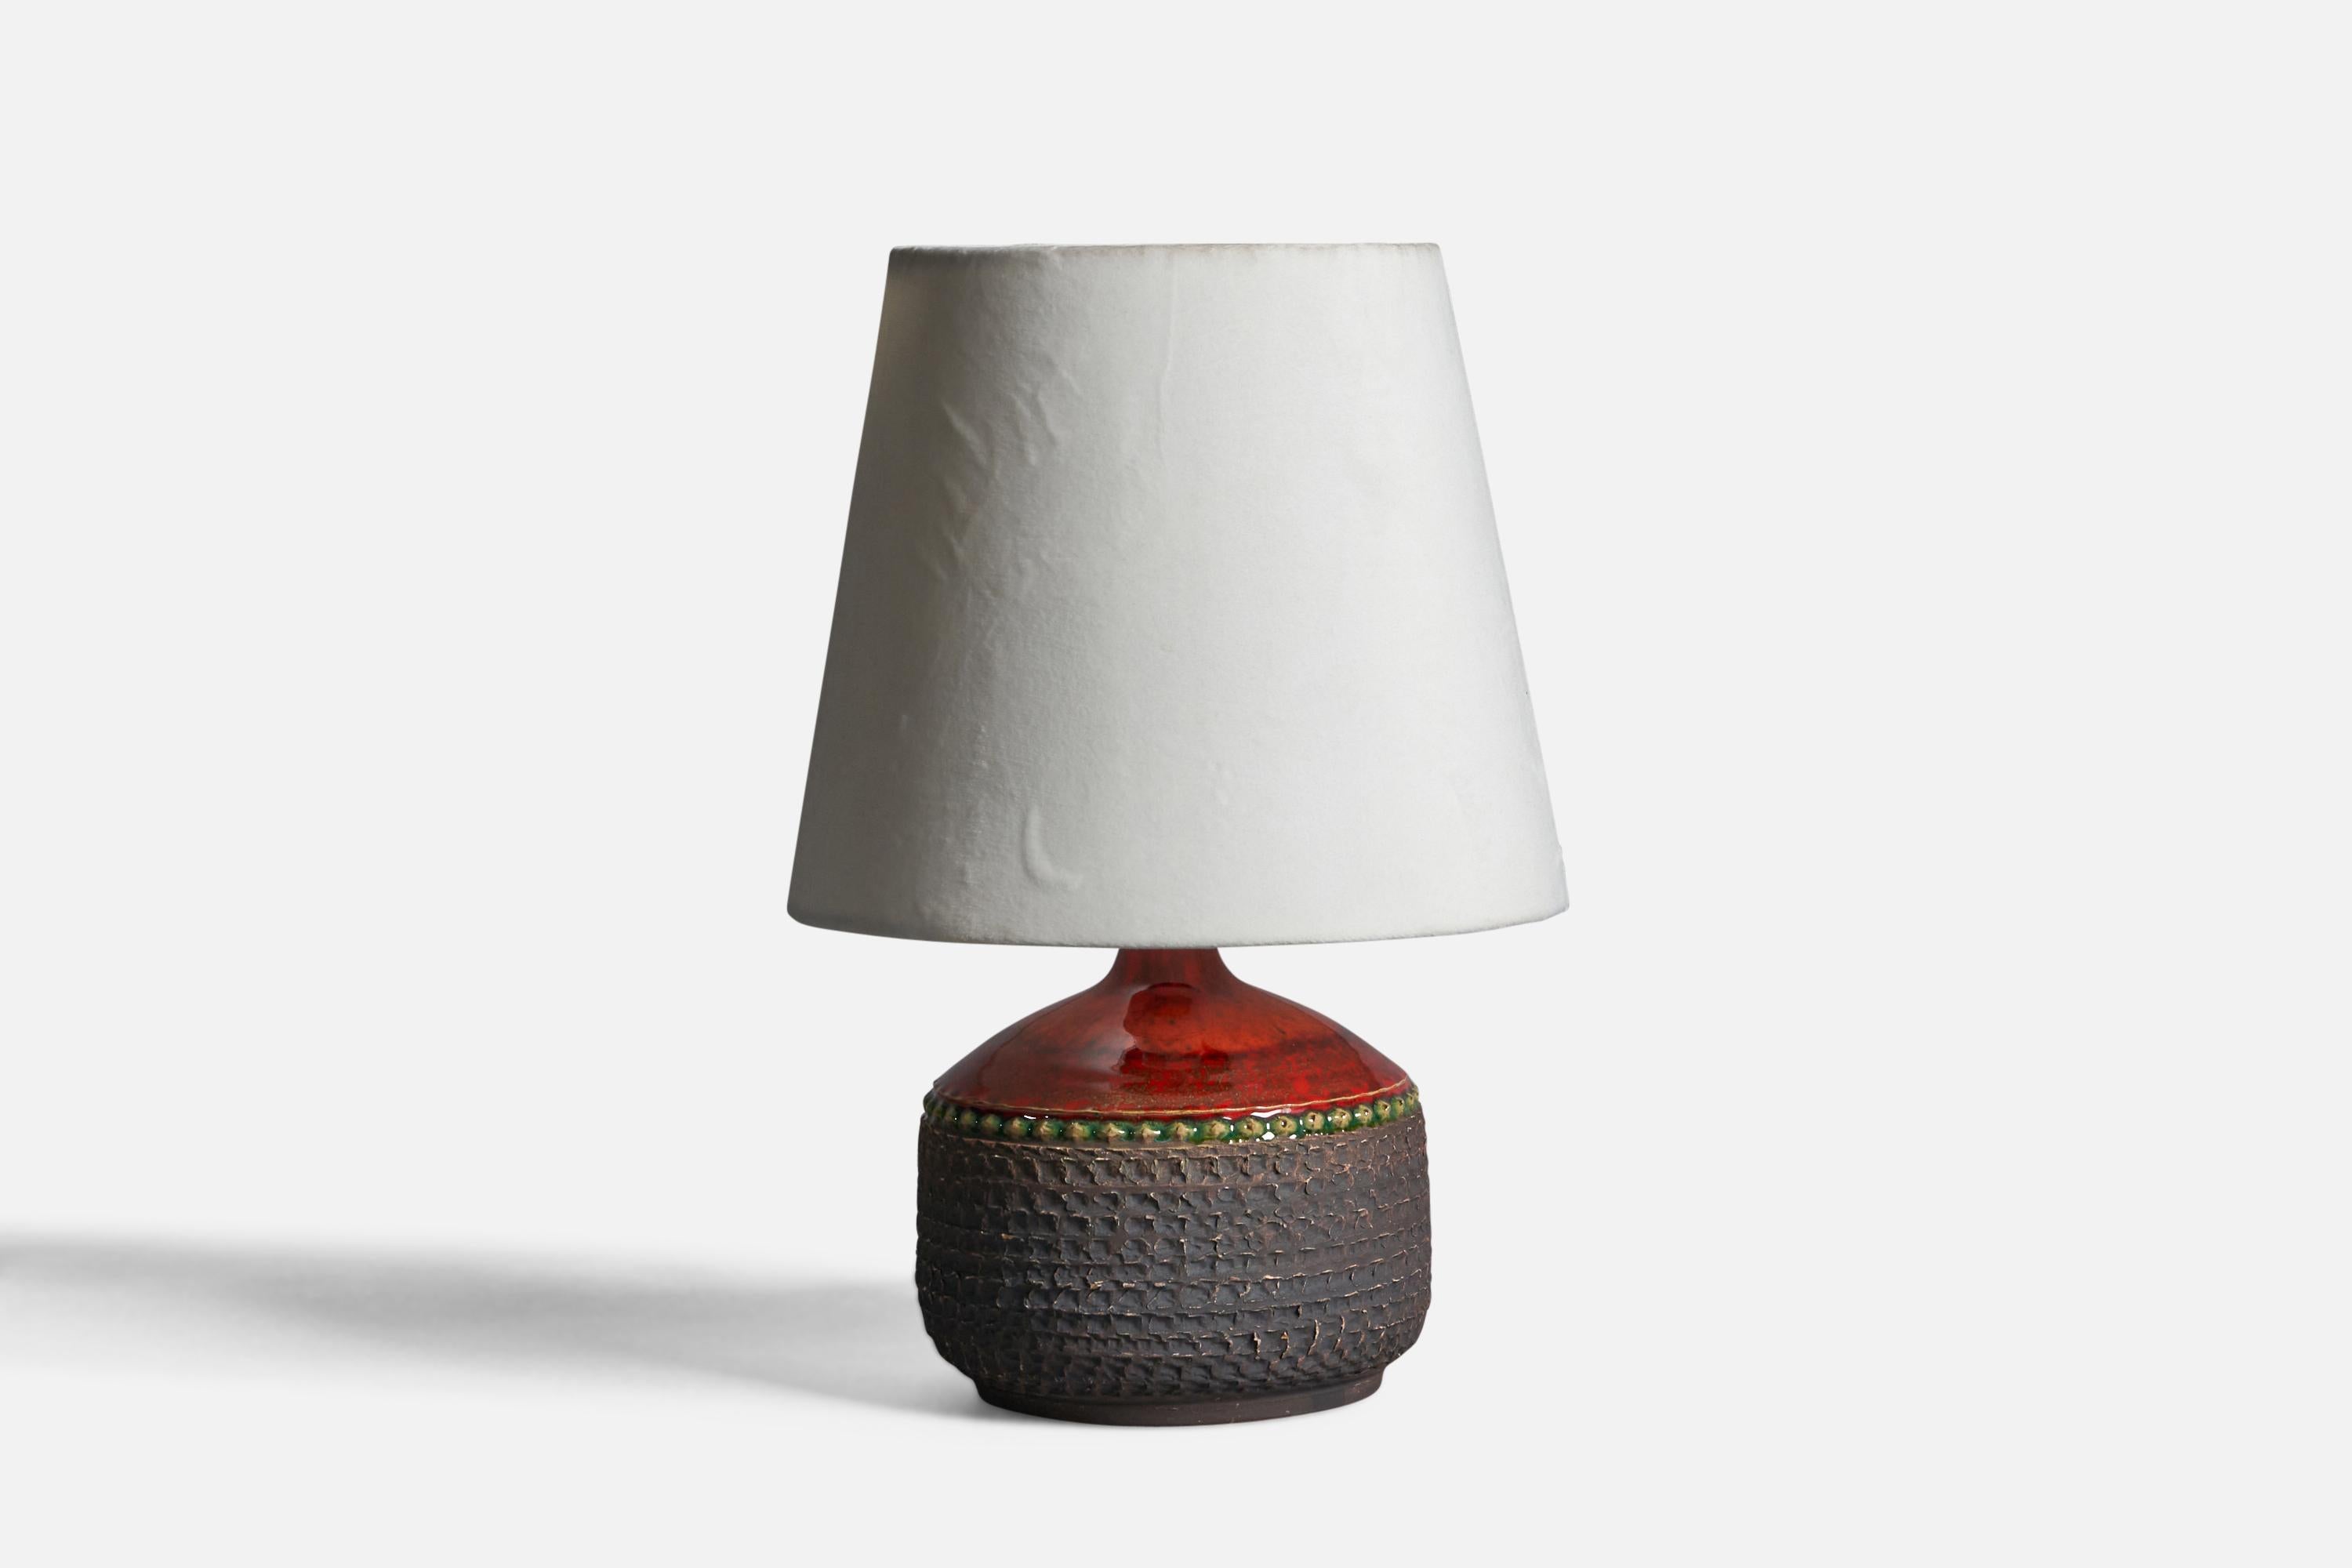 A red green semi-glazed stoneware and white velvet table lamp designed and produced by Klase Höganäs, Sweden, 1960s.
Dimensions of Lamp (inches): 7.25